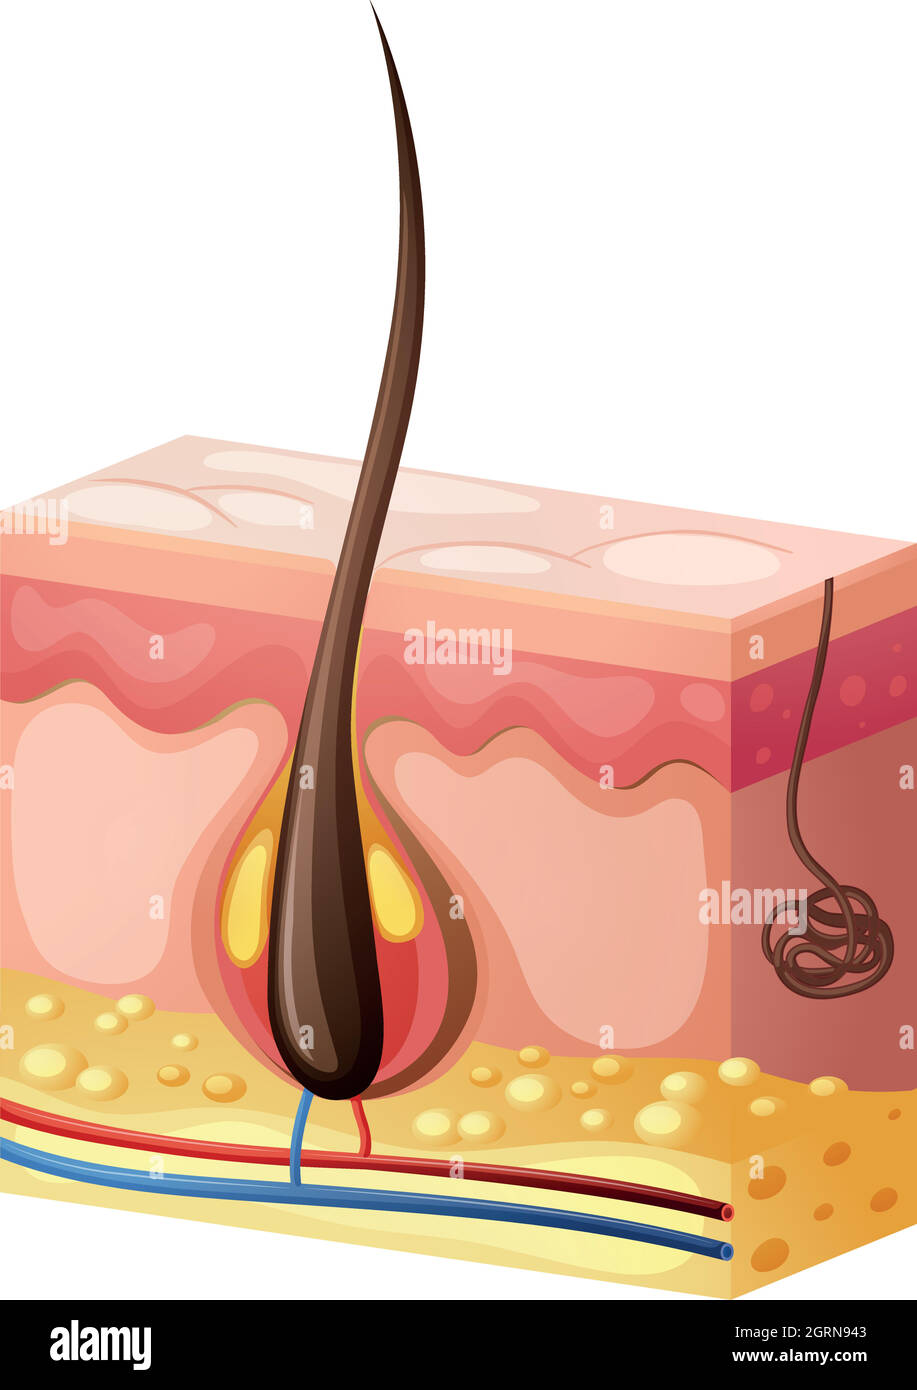 Human hair growing from the skin Stock Vector